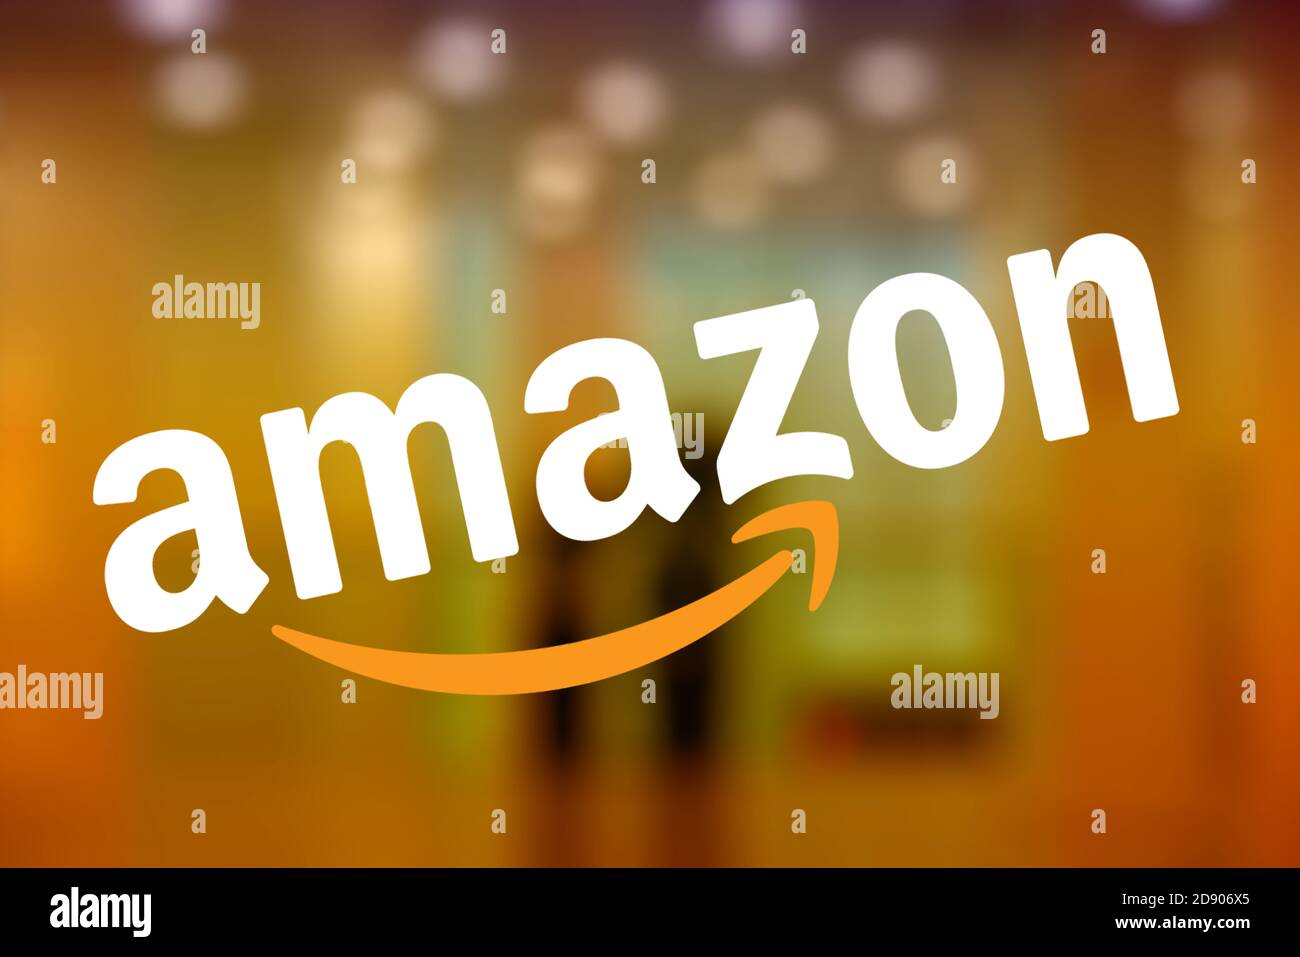 Amazon Books Seattle High Resolution Stock Photography and Images - Alamy